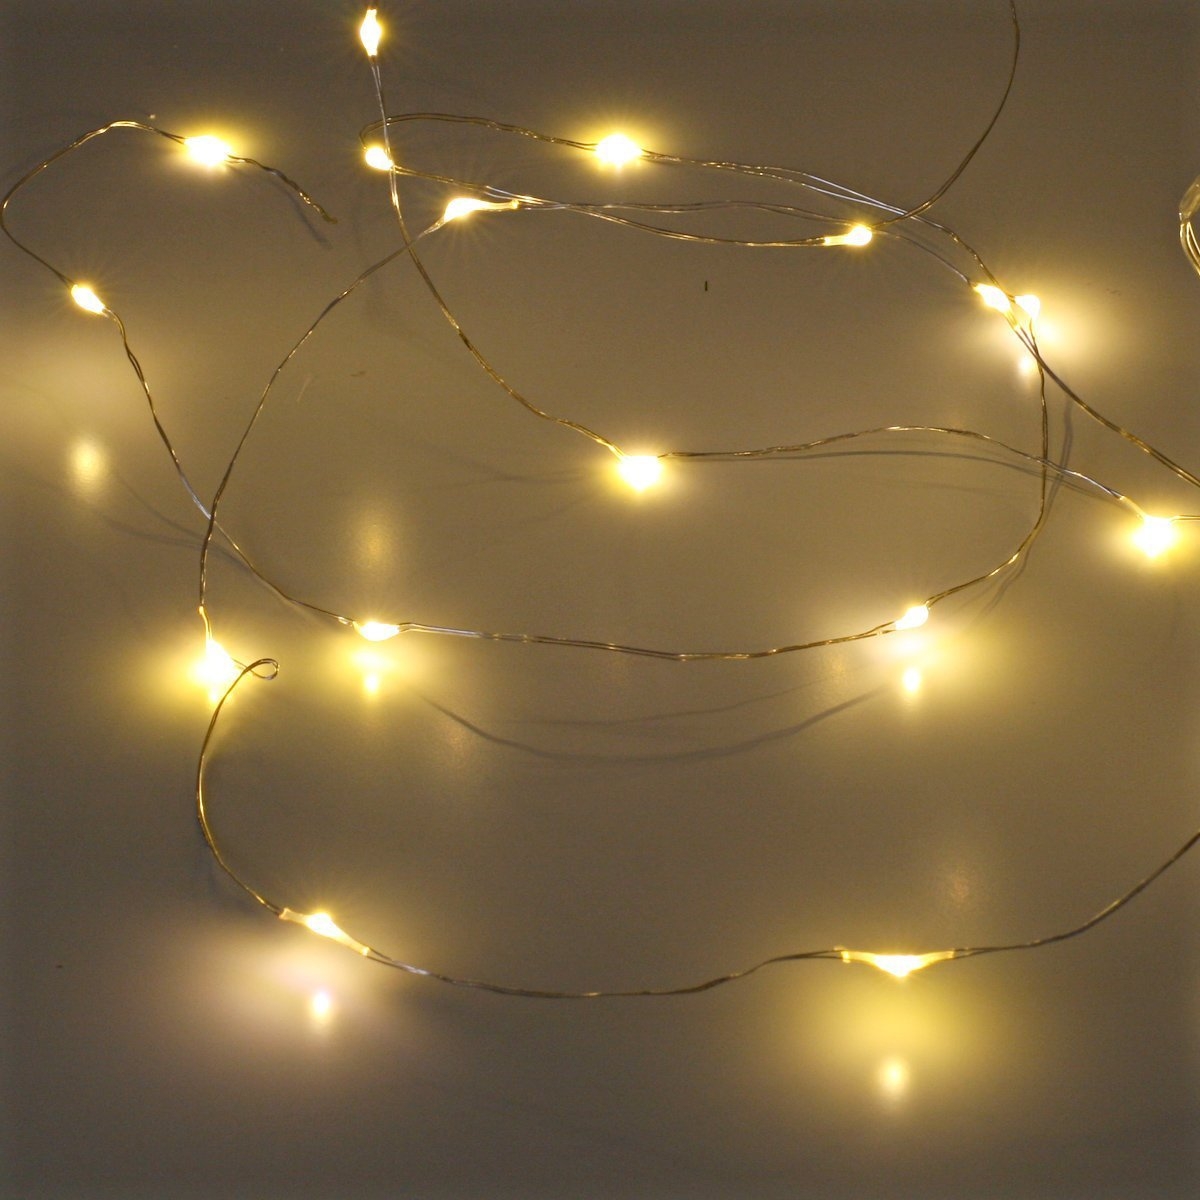 Sanniu Led String Lights, Mini Battery Powered Copper Wire Starry Fairy Lights, Battery Operated Lights for Bedroom, Christmas, Parties, Wedding, Centerpiece, Decoration (5m/16ft Warm White)